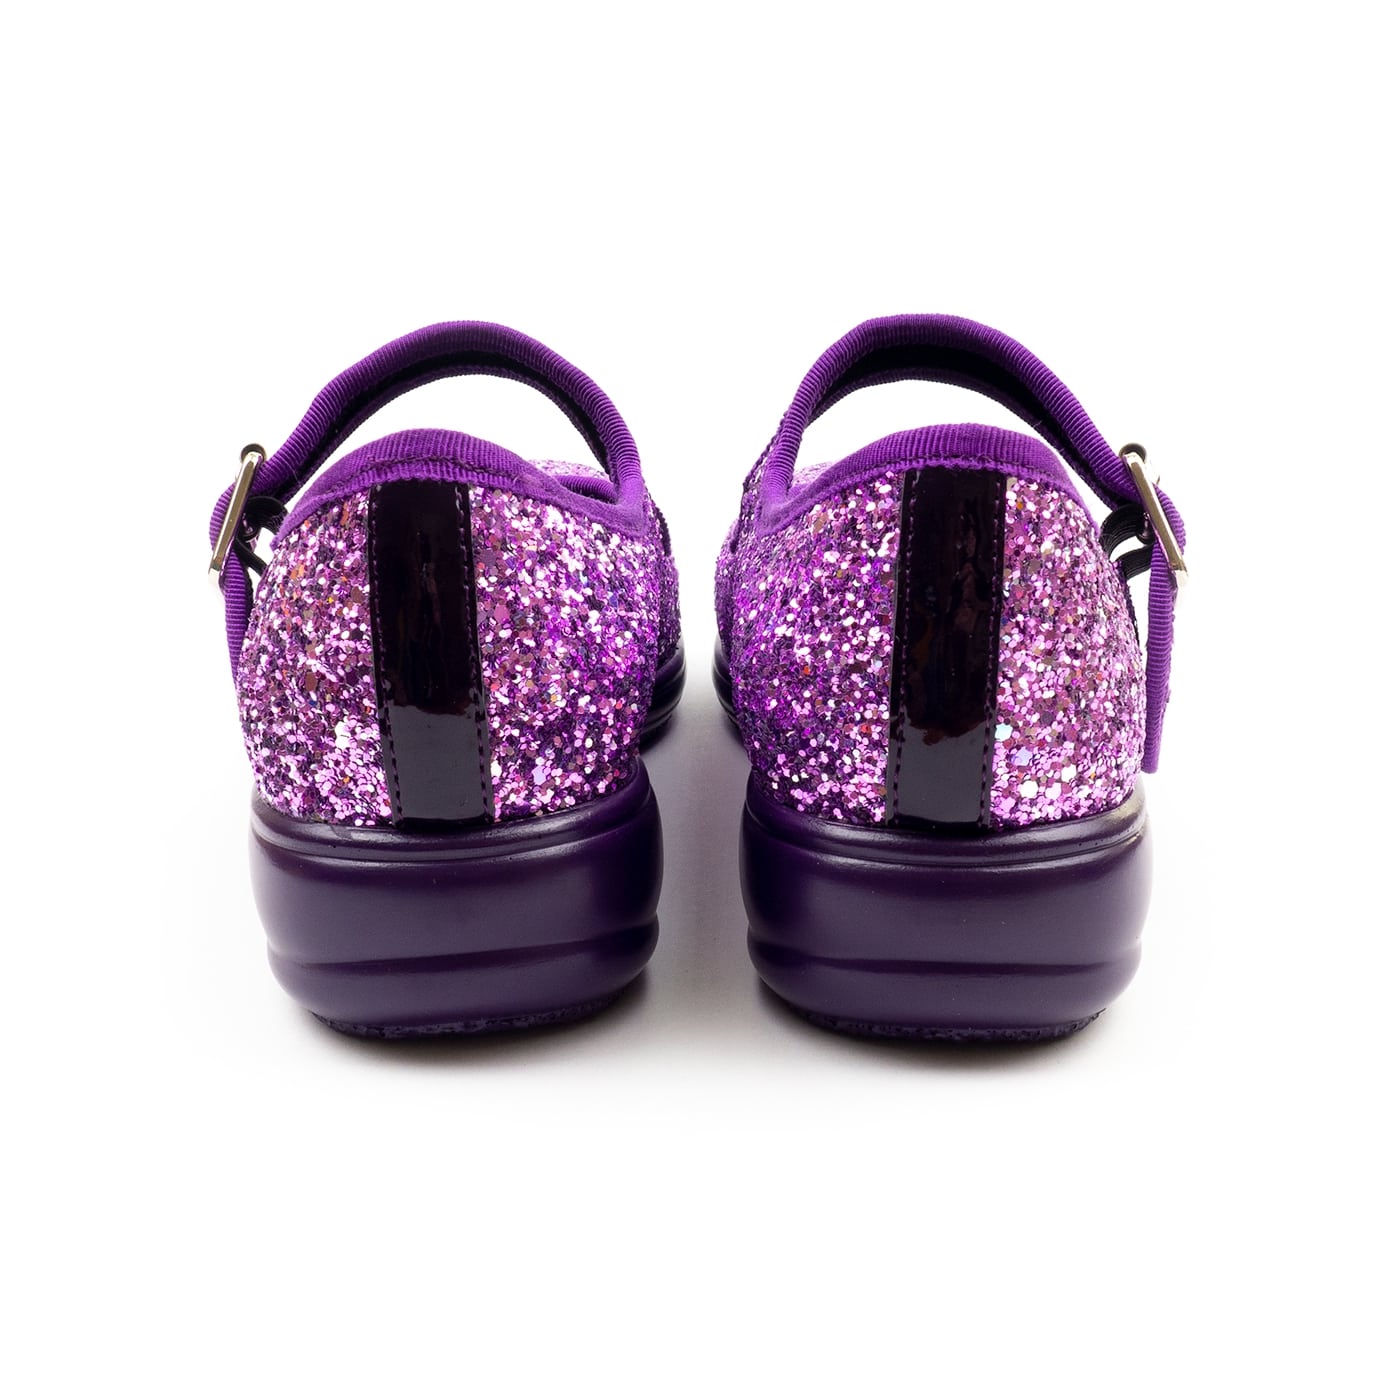 Amethyst Mary Janes by RainbowsAndFairies.com (Purple Glitter - Sparkle - Shoes - Buckle Up - Lilac) - SKU: FW_MARYJ_AMTHS_ORG - Pic 05